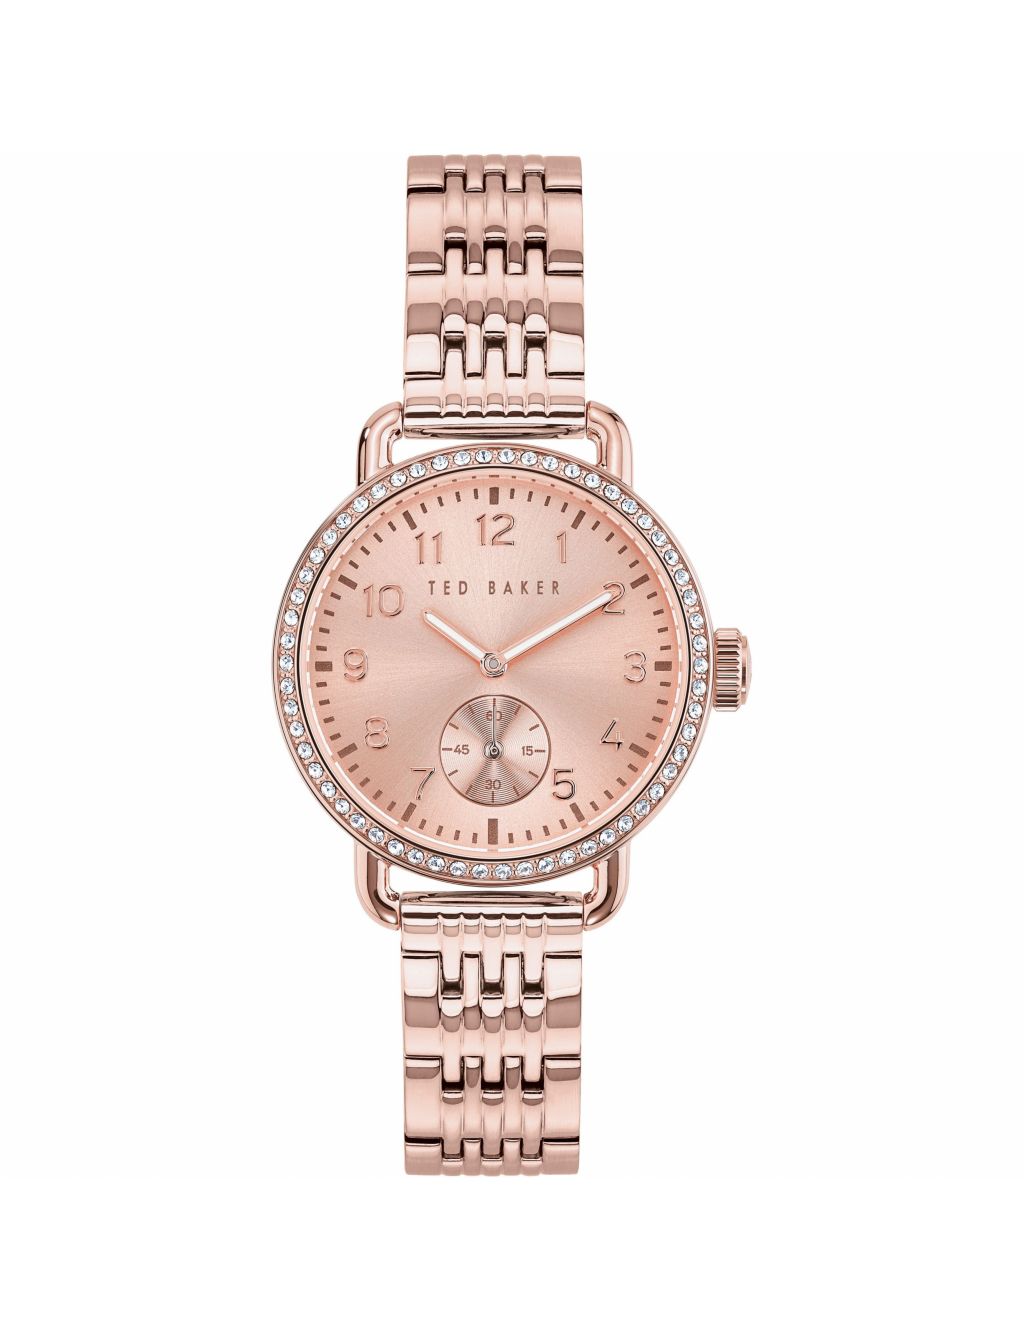 Ted Baker Hannahh Gold Watch image 1